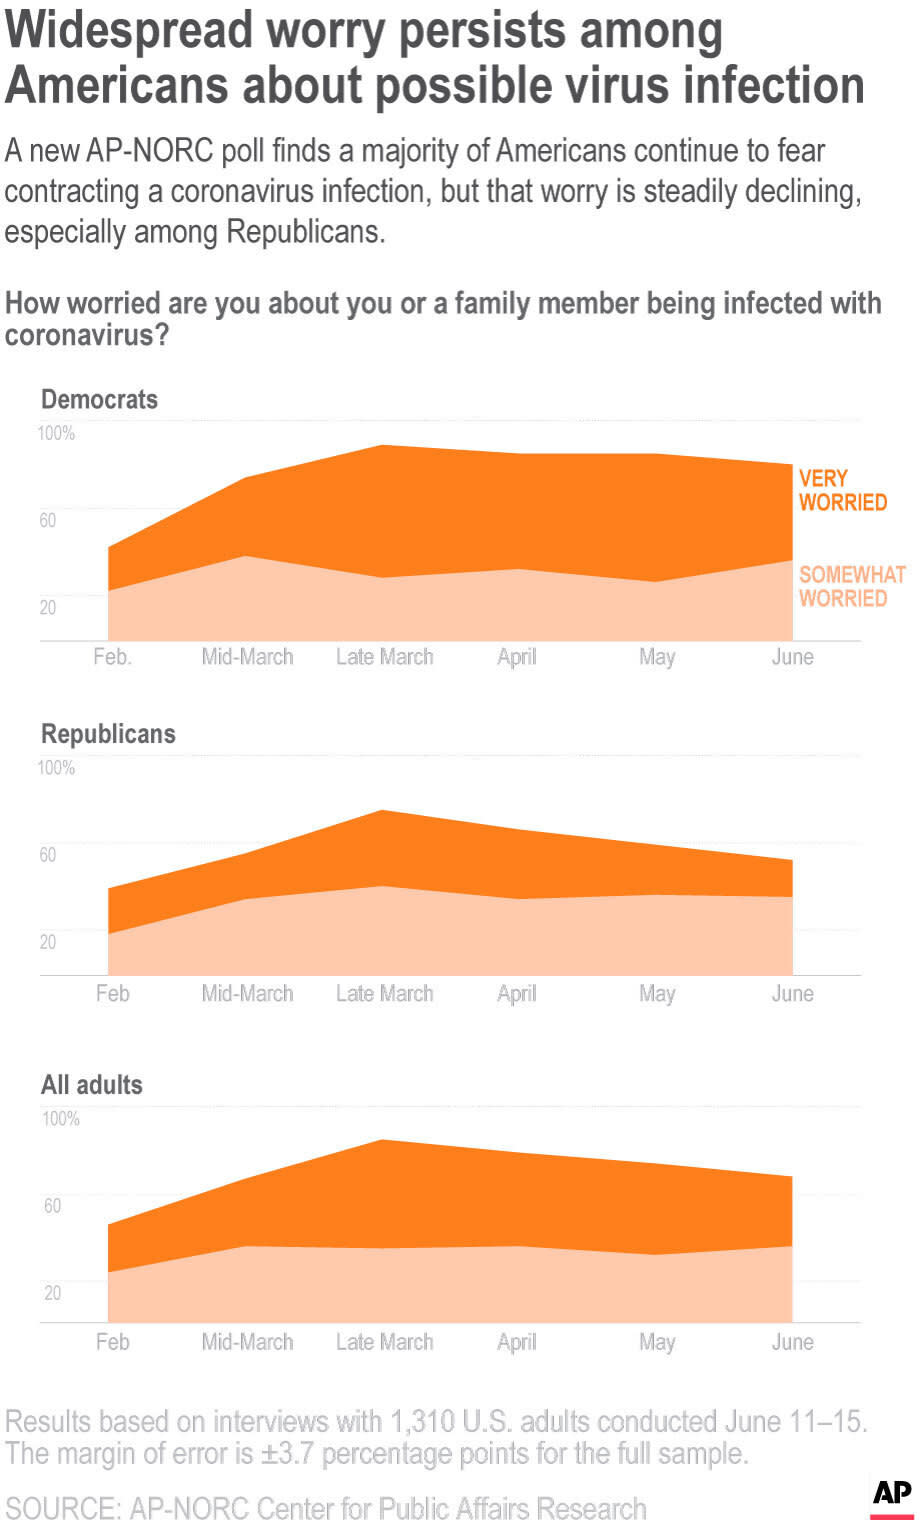 A new AP-NORC poll finds a majority of Americans continue to fear contracting a coronavirus infection, but that worry is steadily declining, especially among Republicans.;